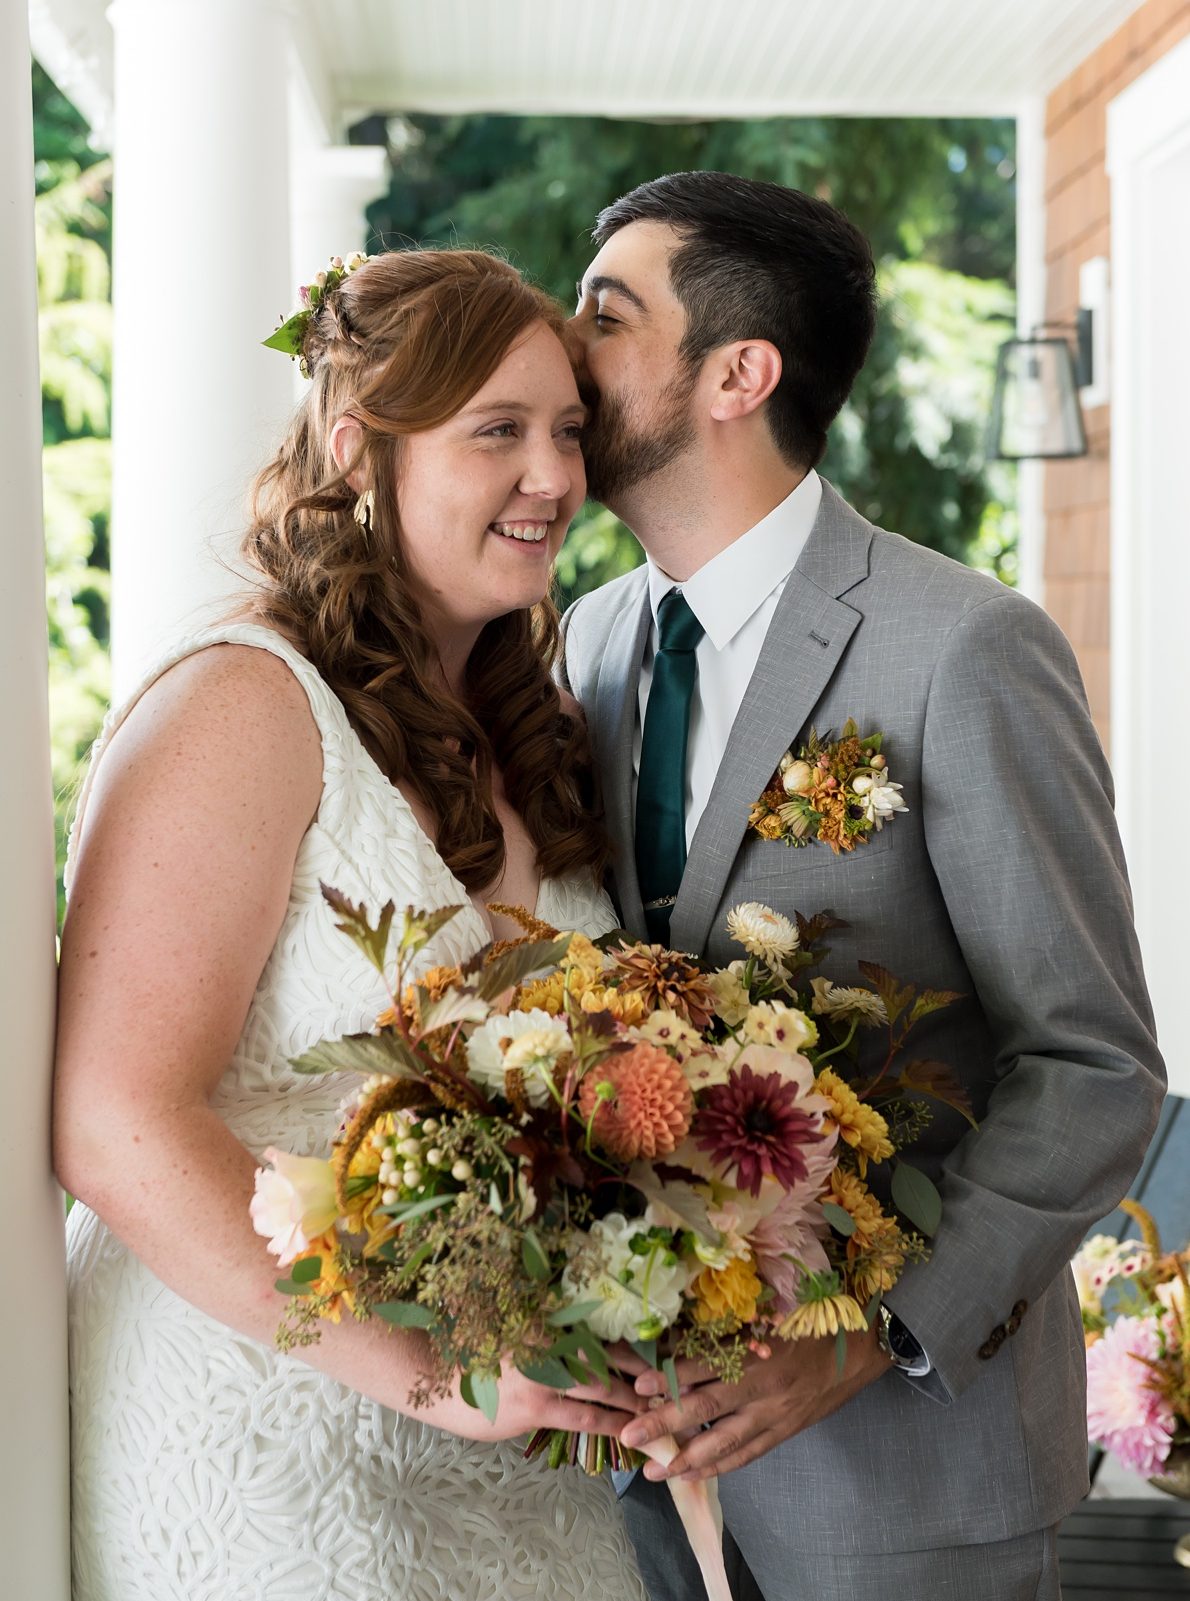 A bride and groom hold a sumer bouquet